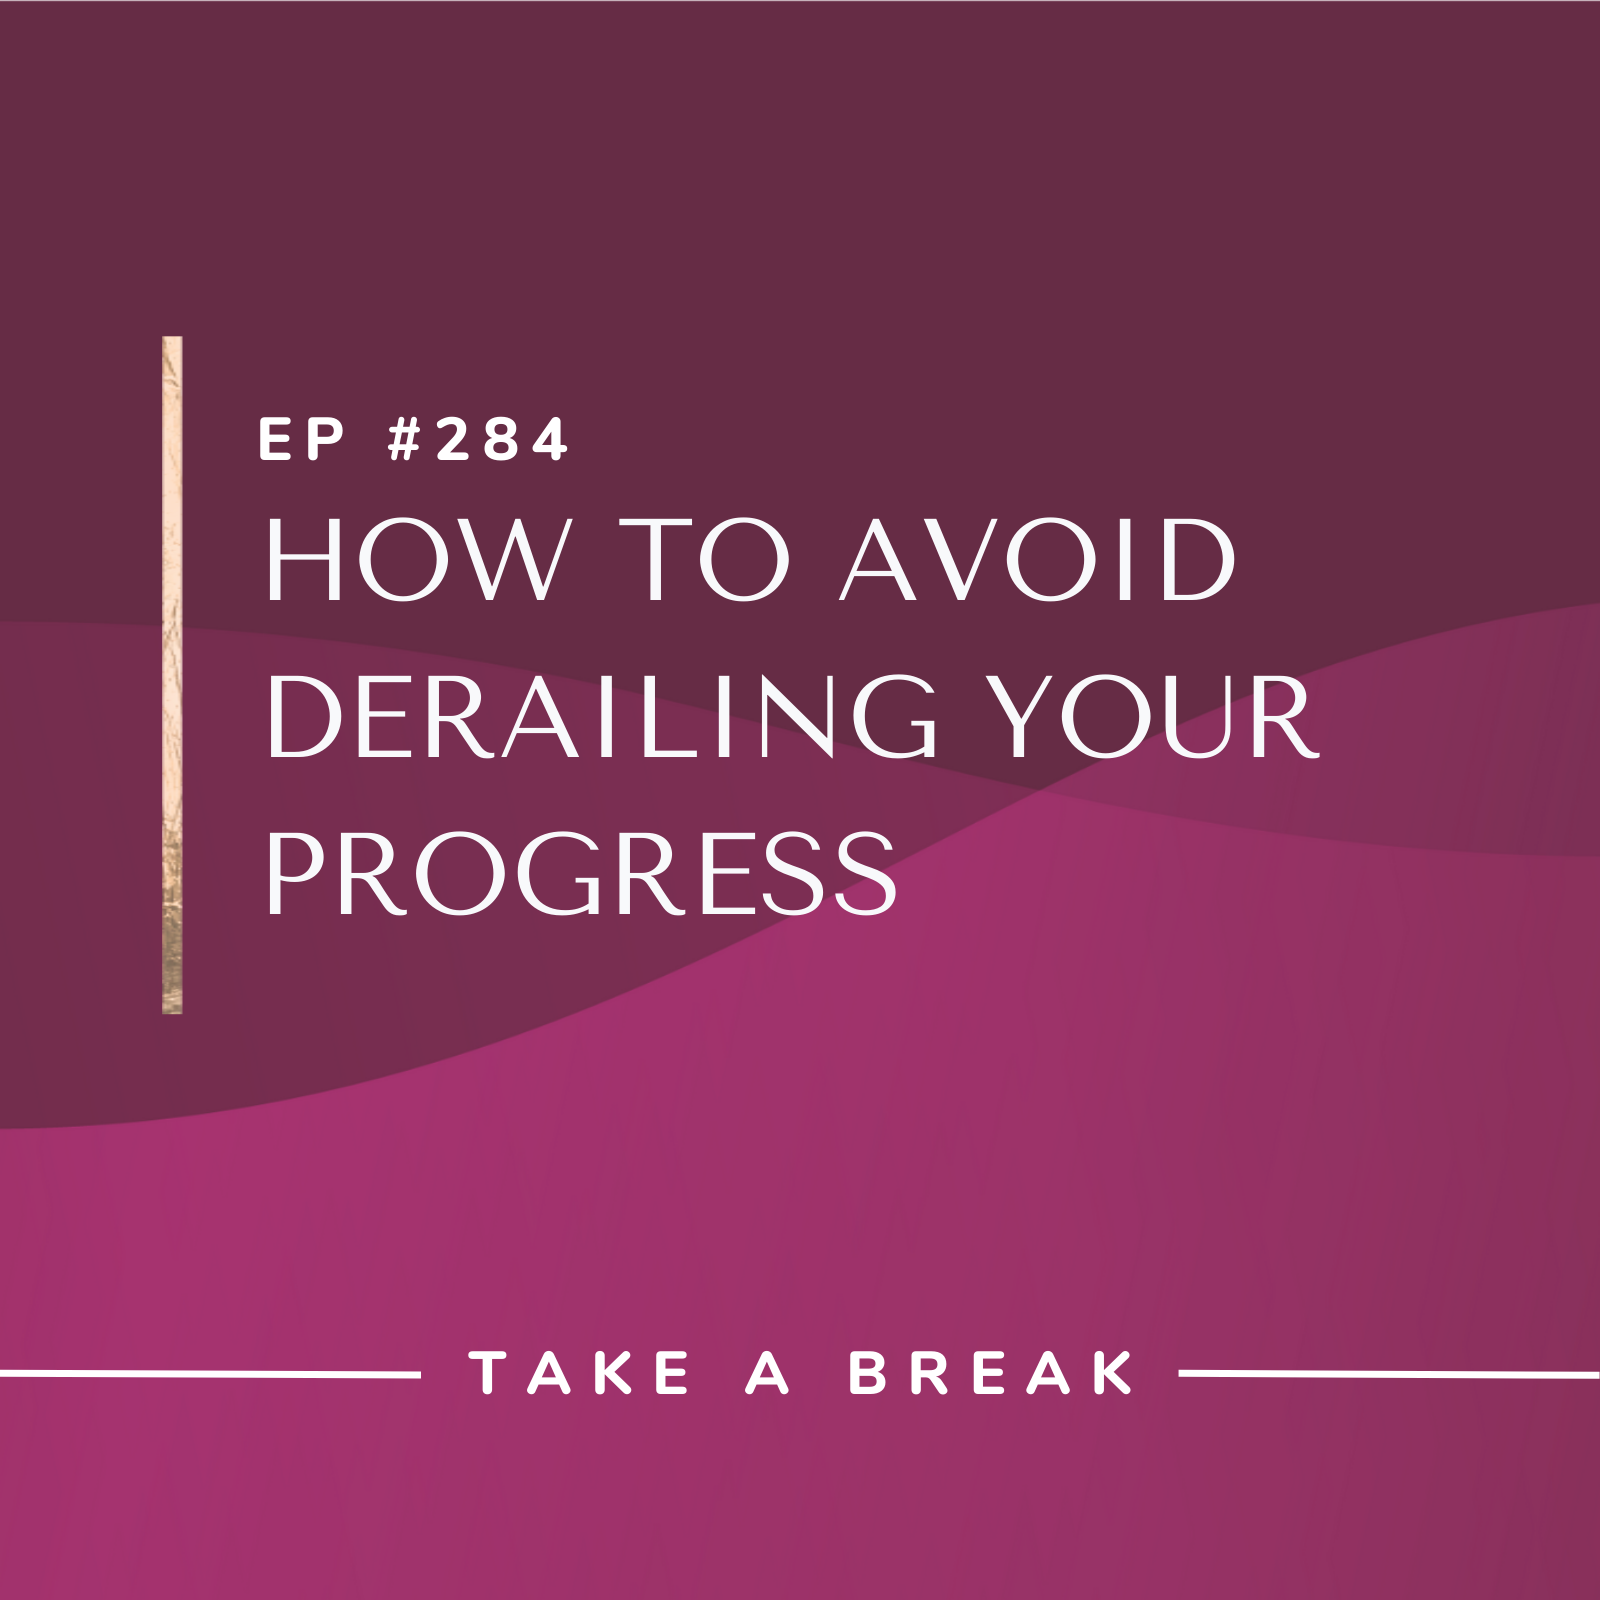 Take A Break from Drinking How to Avoid Derailing Your Progress